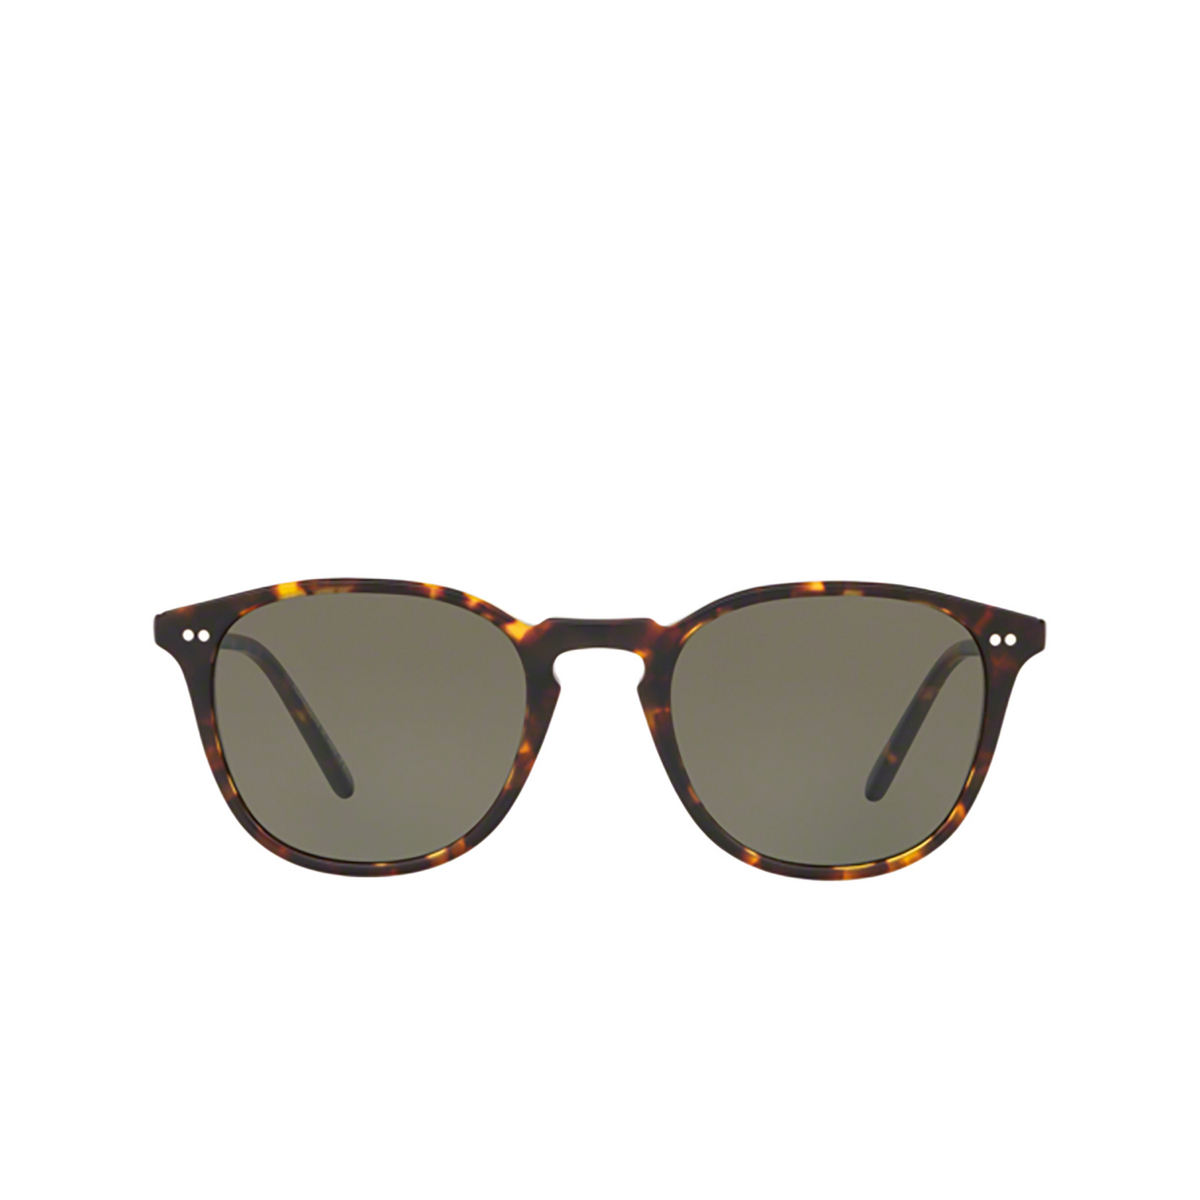 Oliver Peoples FORMAN L.A Sunglasses 16549A DM2 - front view